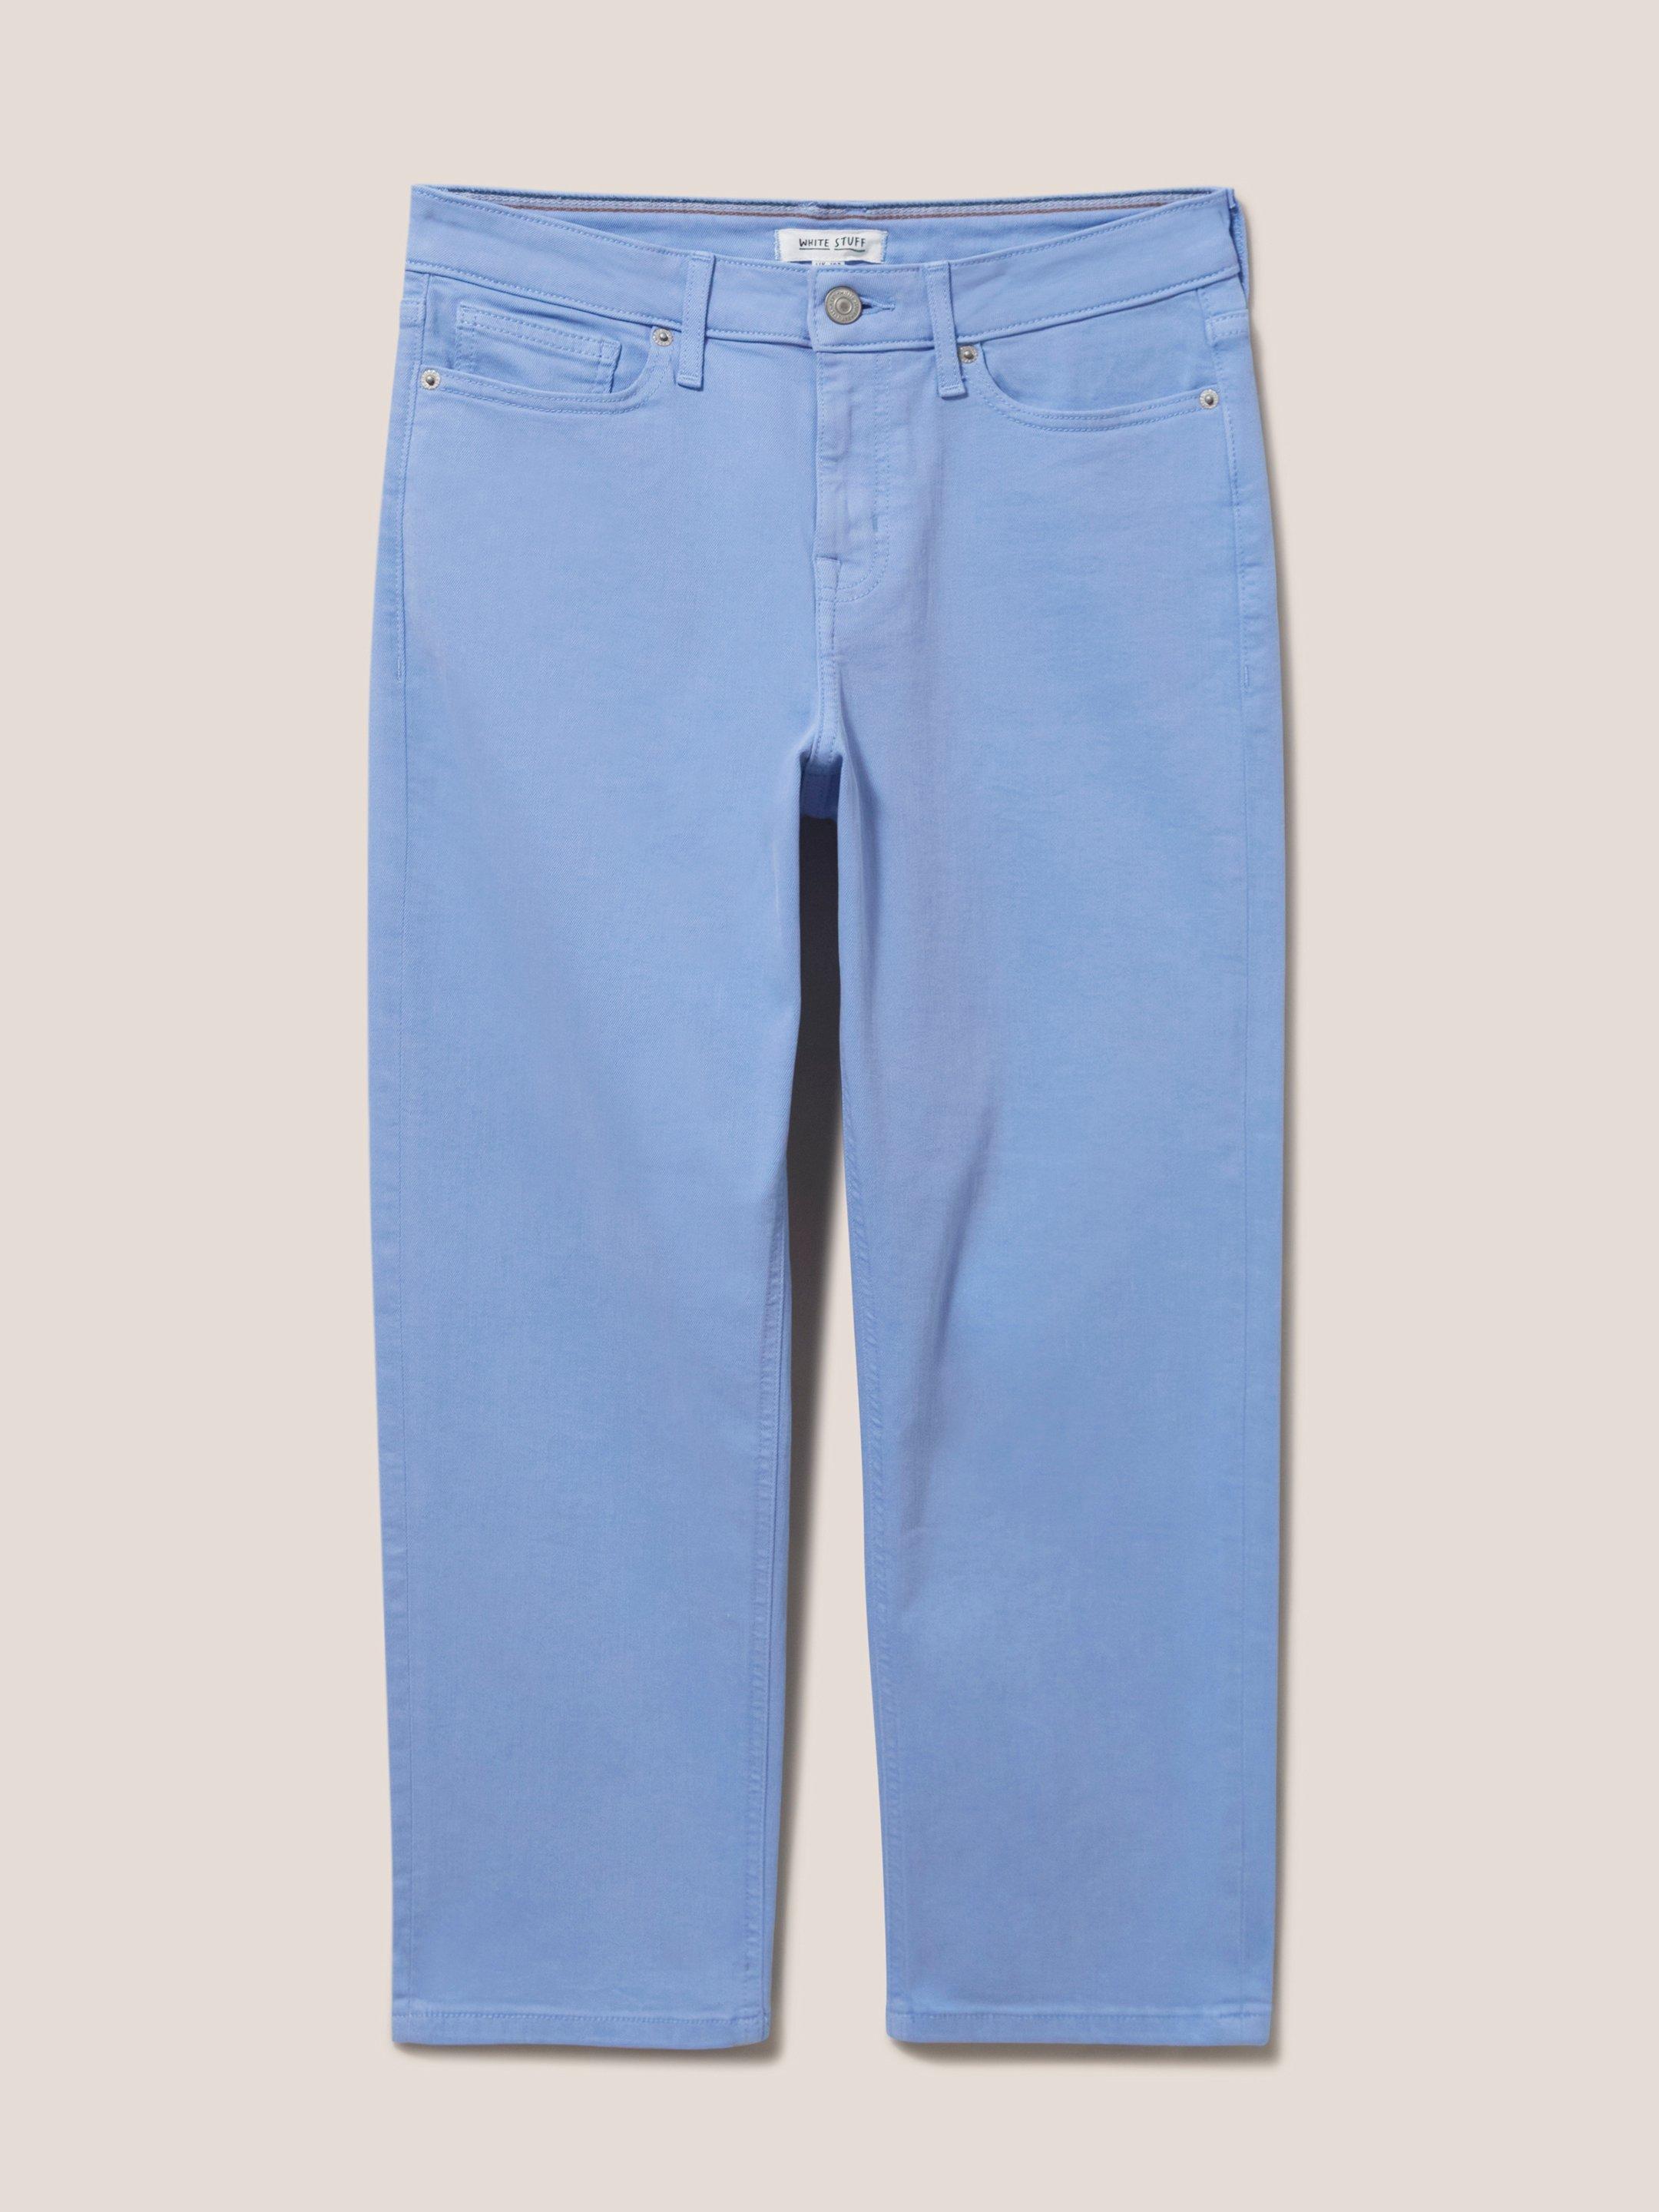 Blake Straight Crop Jeans in MID BLUE - FLAT FRONT